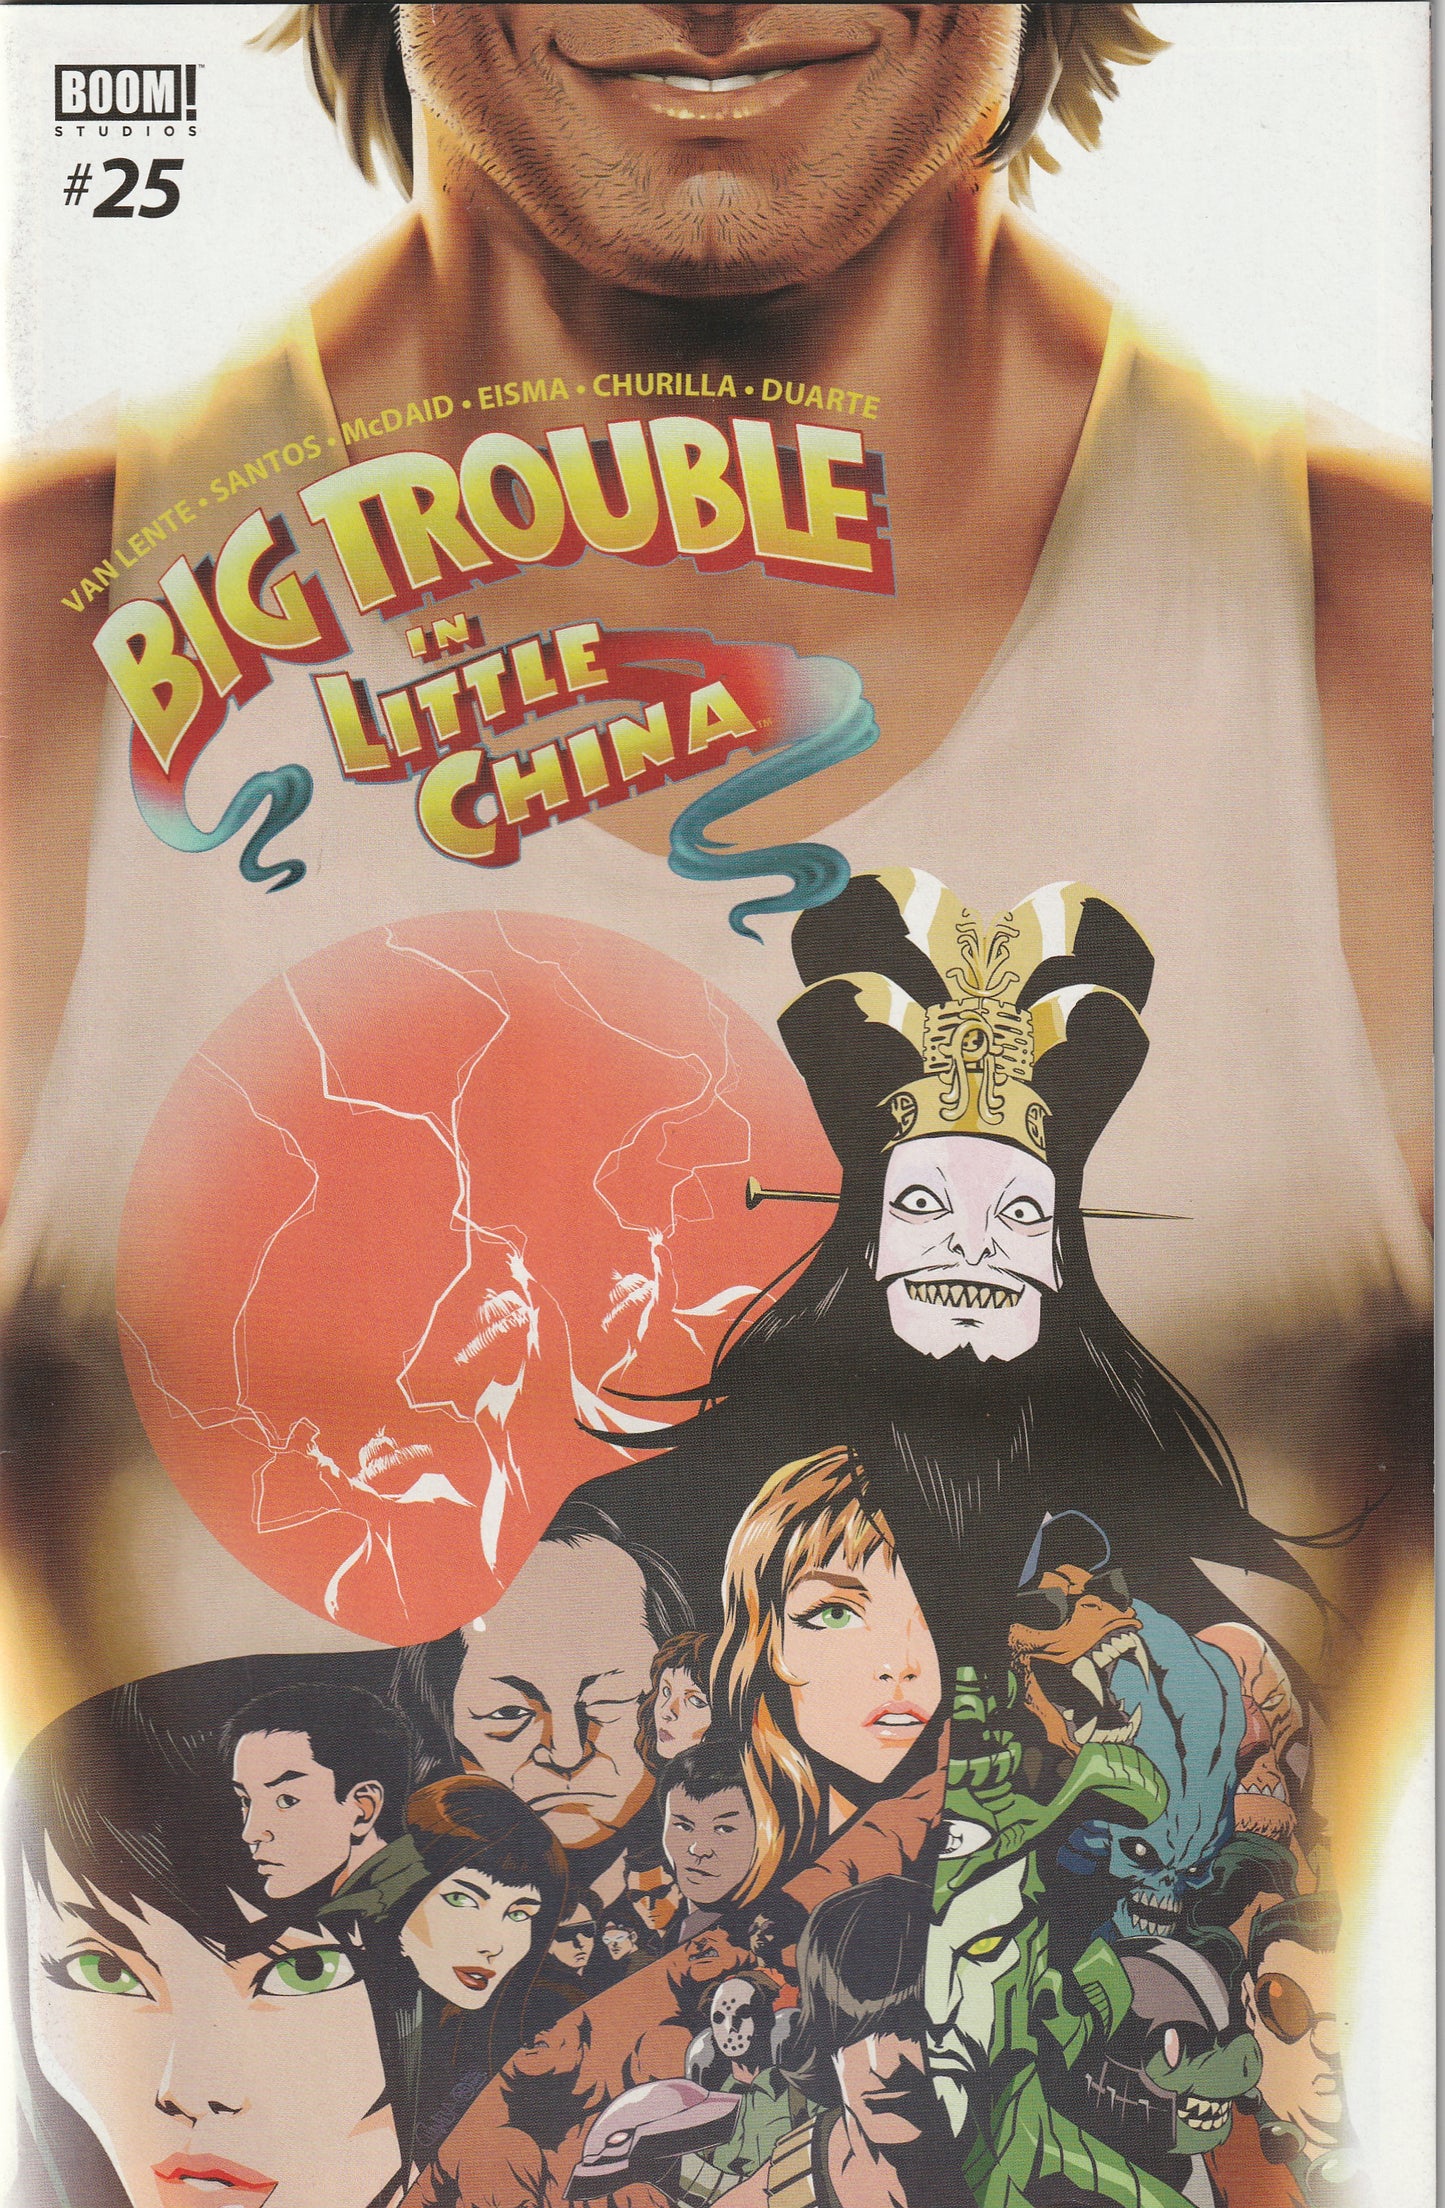 Big Trouble in Little China #25 (2016)